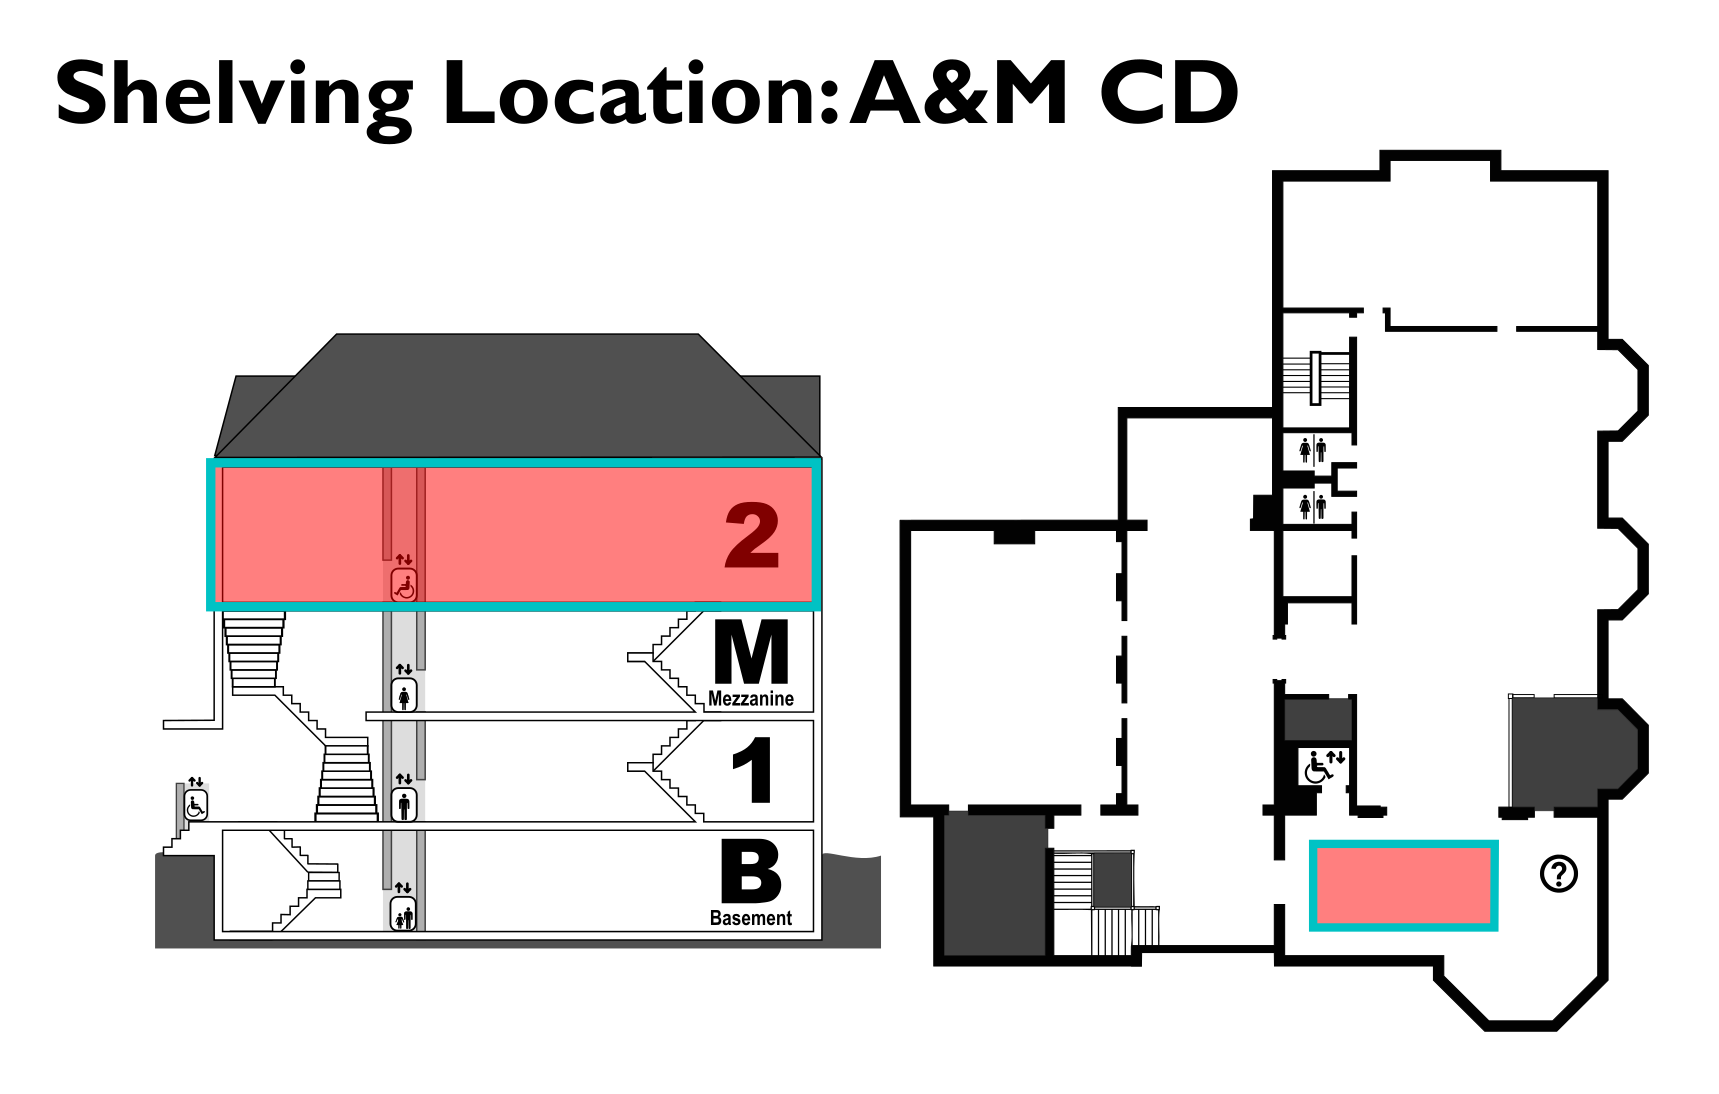 map showing the location of the A&M CD shelving location